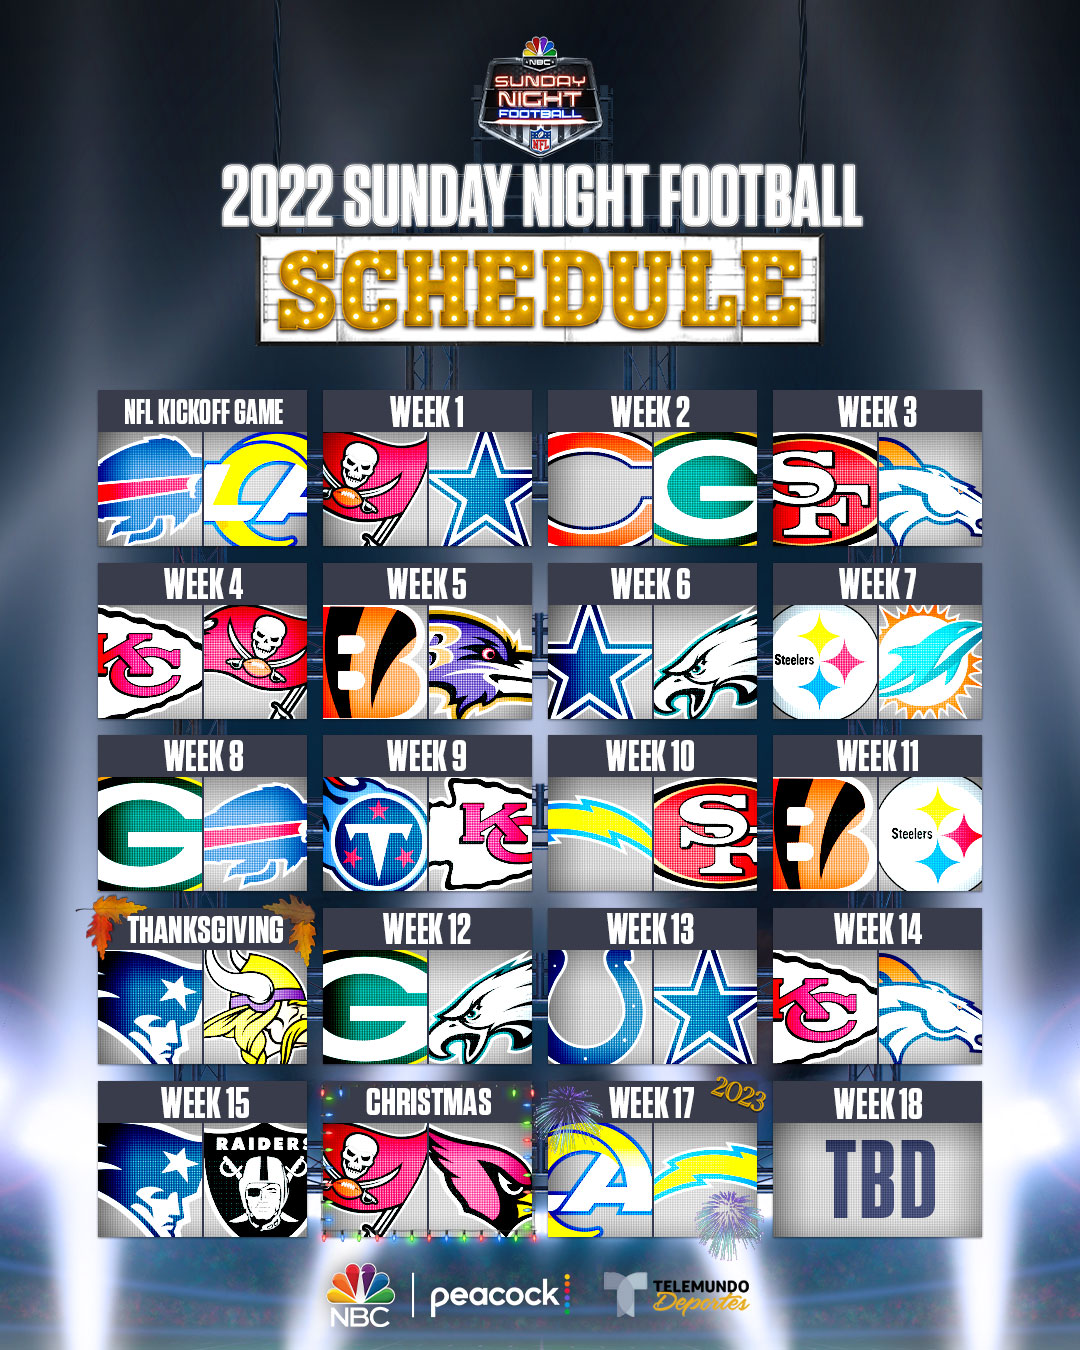 SUNDAY NIGHT FOOTBALL IS AGAIN HOME TO THE BEST and BRIGHTEST IN 2022